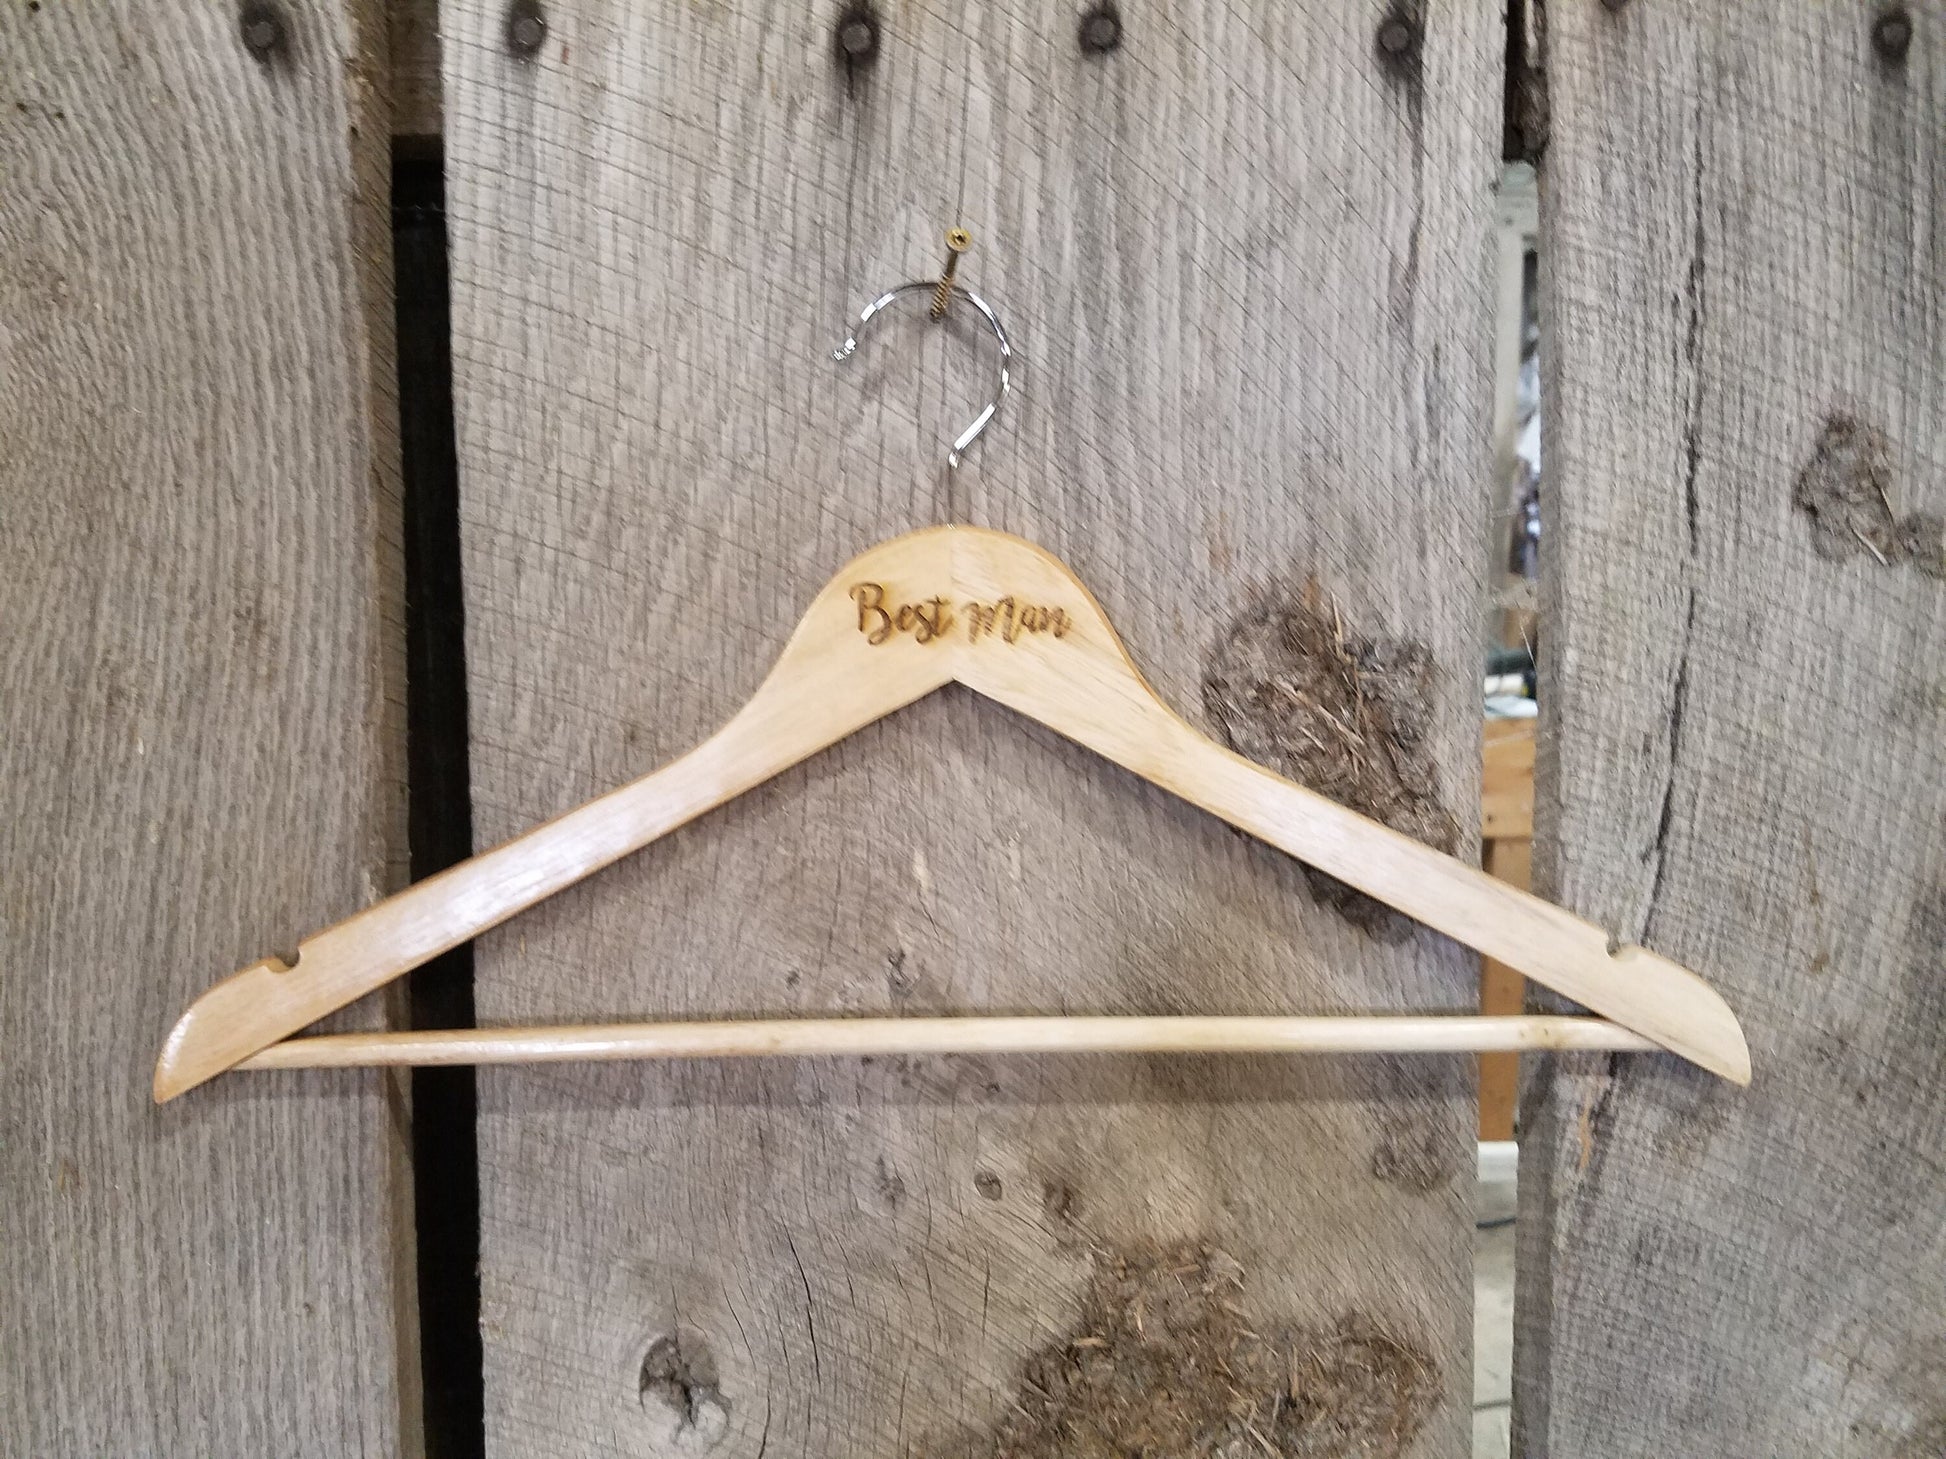 Best Man Suit Clothes Hanger Bridal Party Engraved Hard Wood Coat Sturdy Wedding Bromellow Personalized